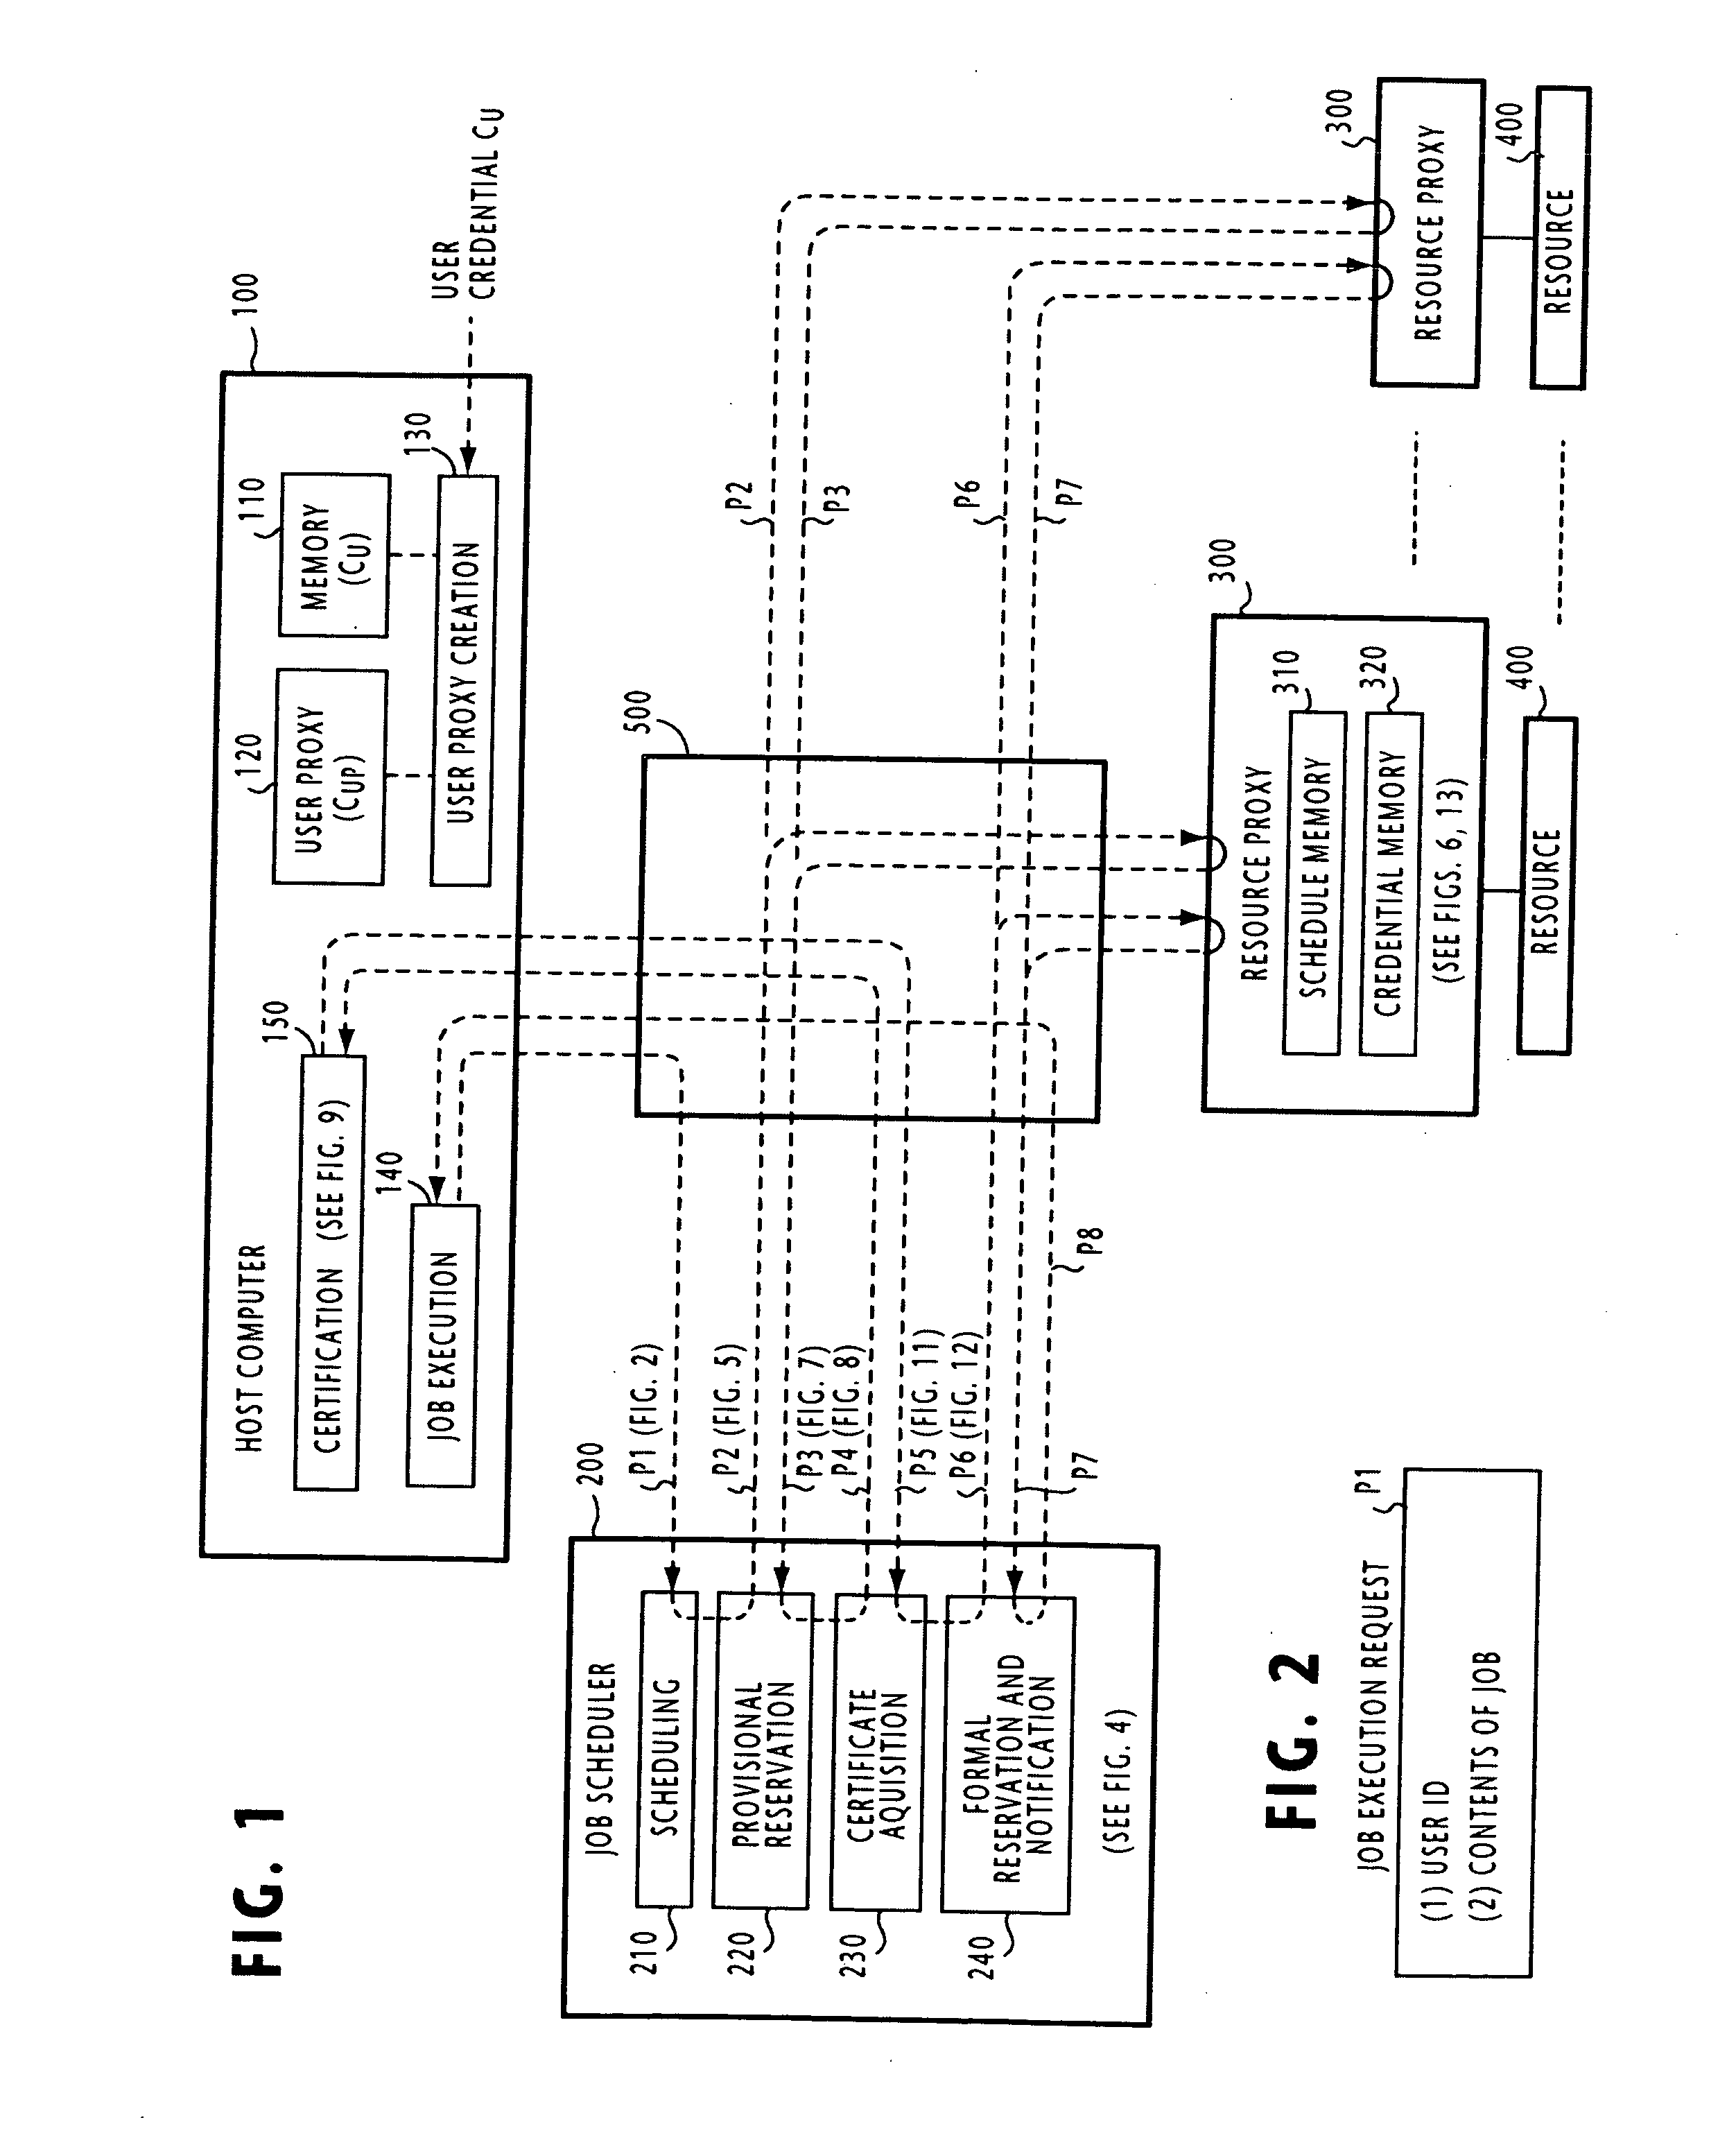 Distributed computing system for resource reservation and user verification